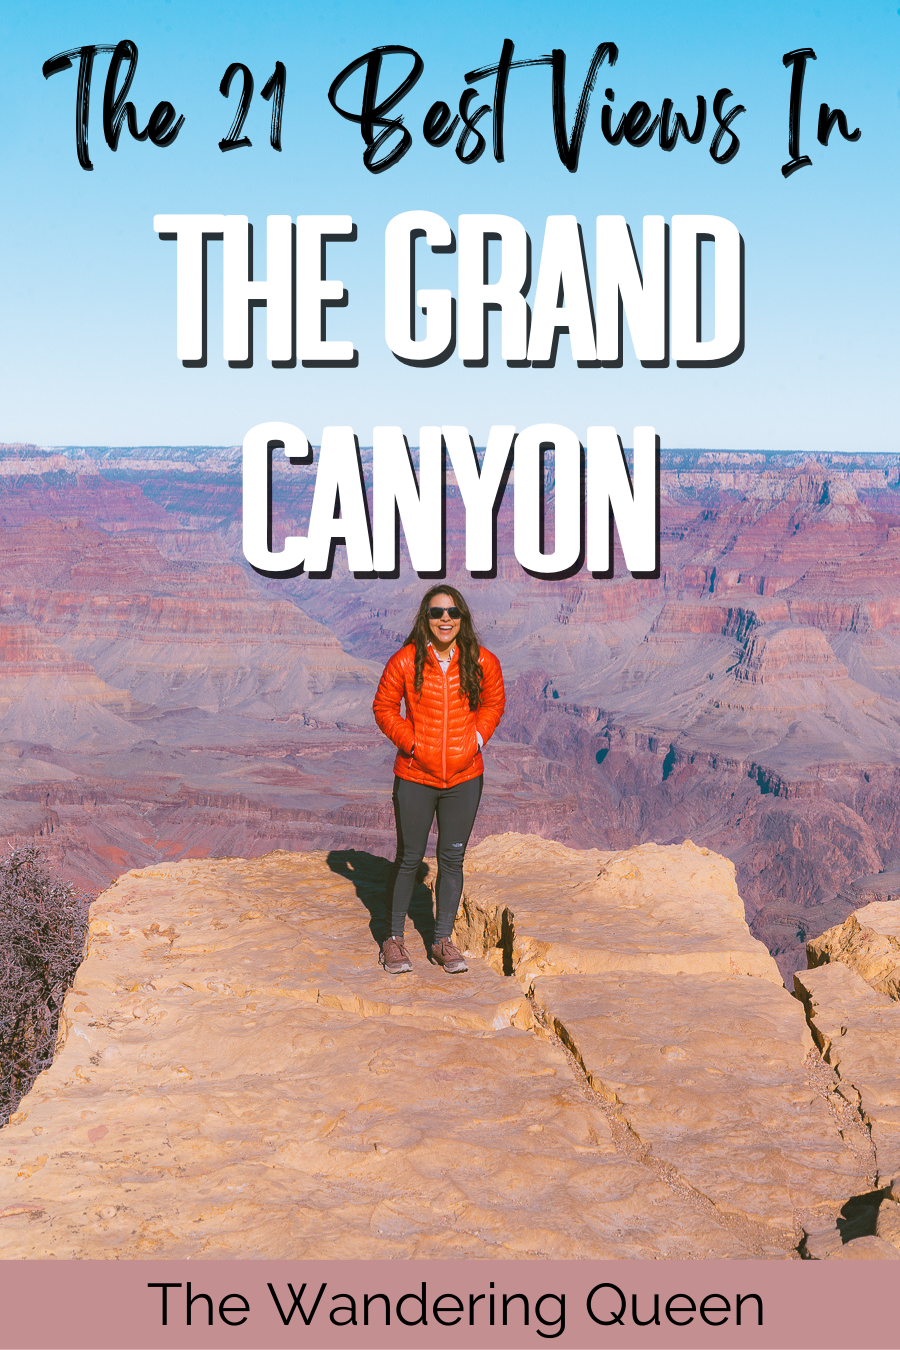 Best Grand Canyon Views